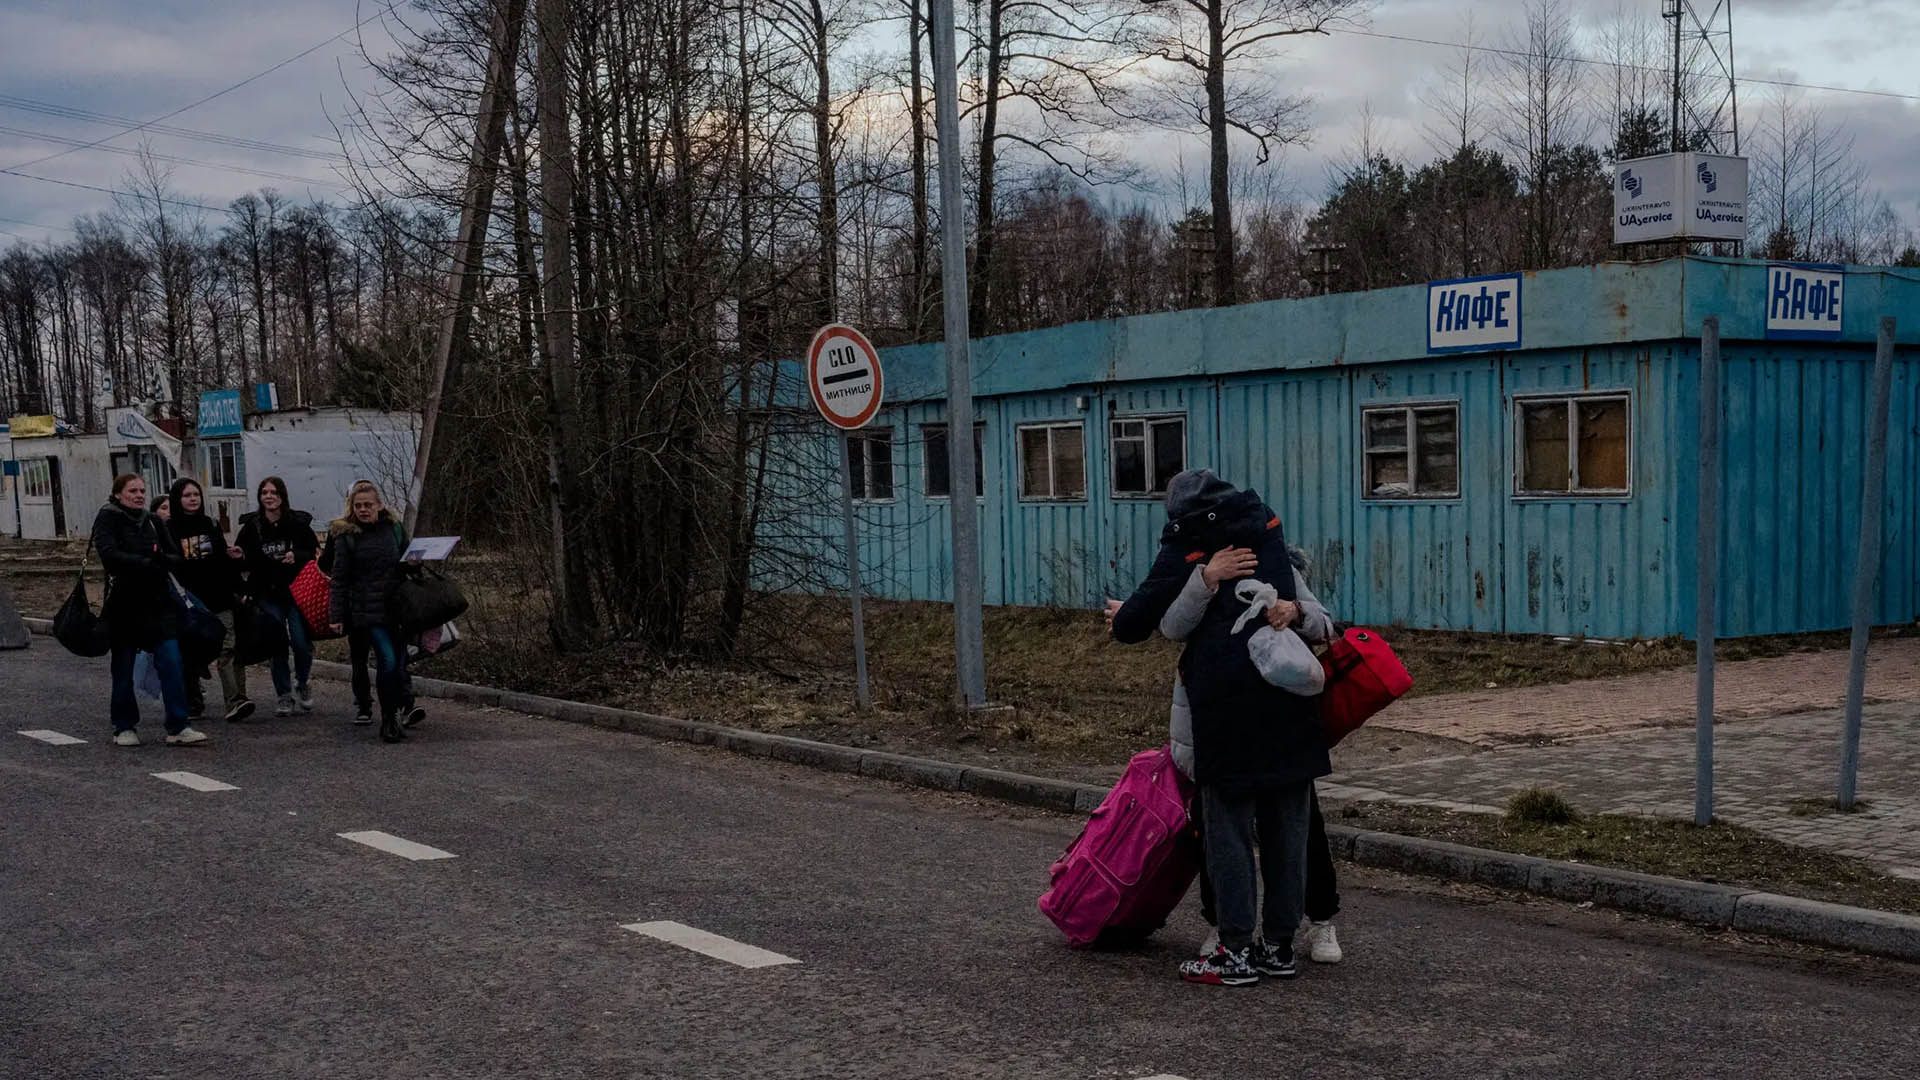 Natalya Zhornyk greets other mothers as they cross into Ukraine after picking up their children from schools and camps in Russia-occupied Ukraine, in Volyn Oblast, Ukraine, on March 21, 2023. (Daniel Berehulak/The New York Times)